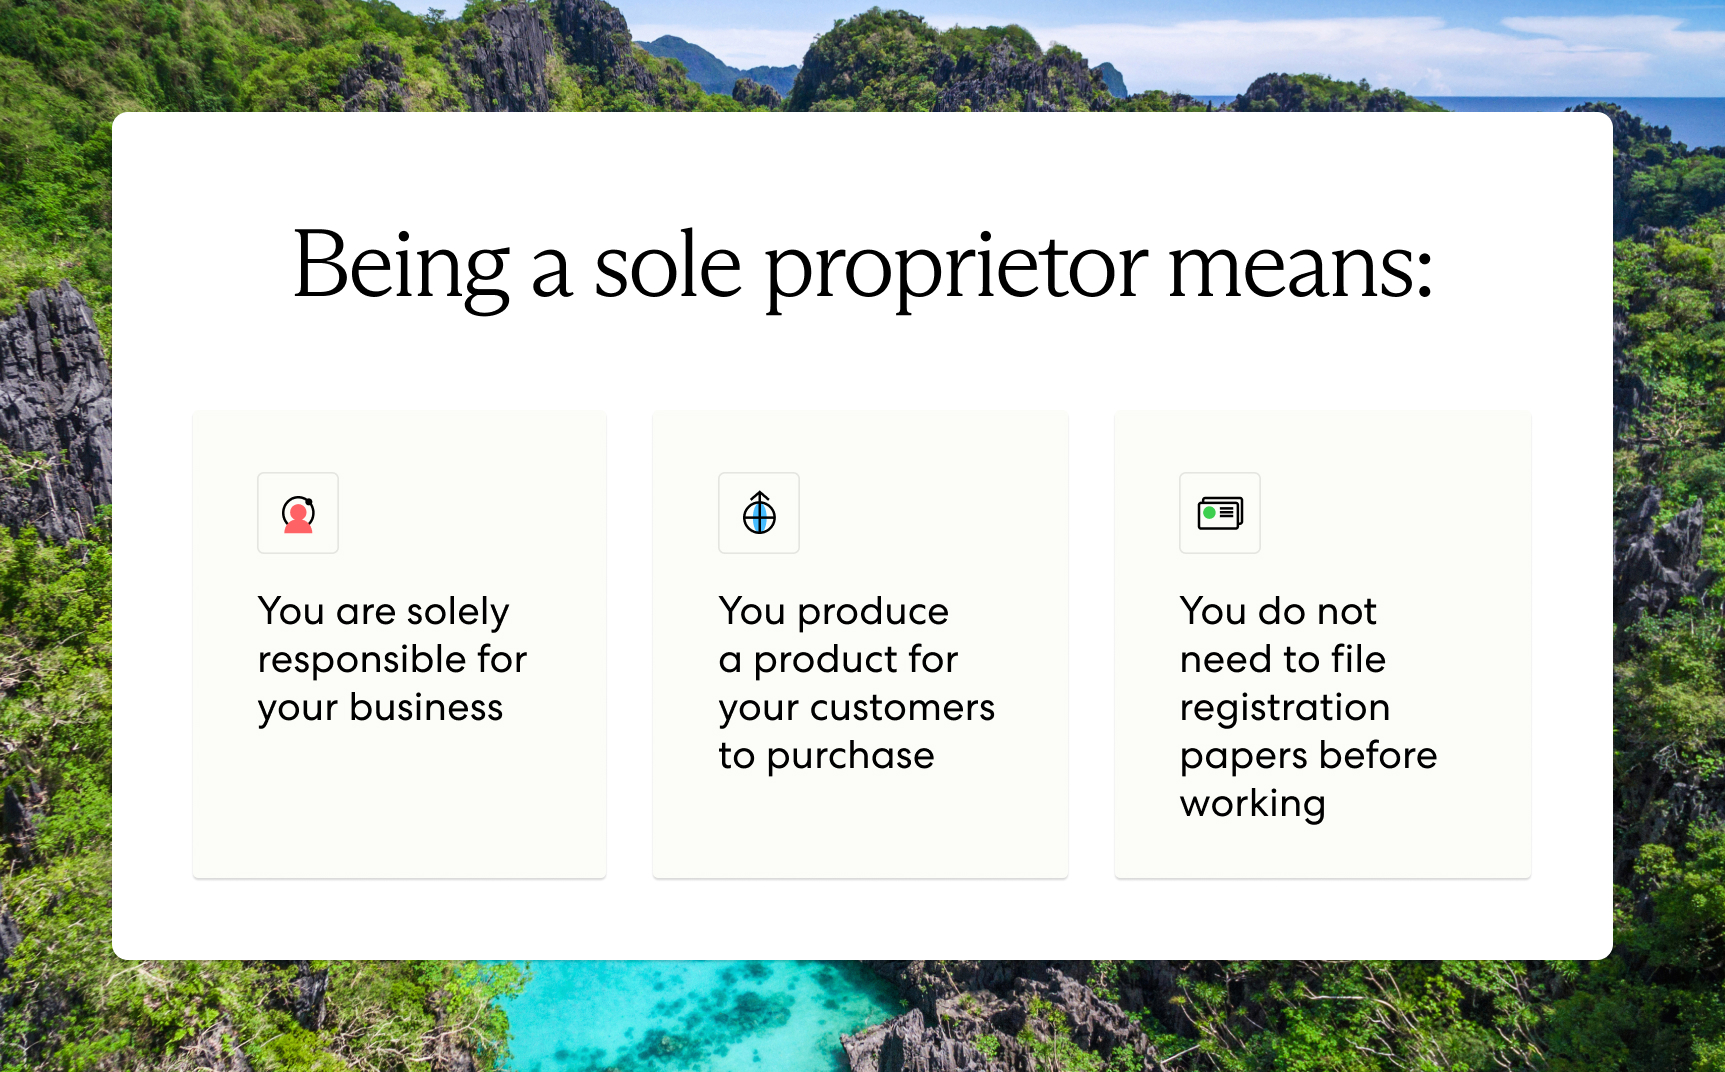 Being a sole proprietor means